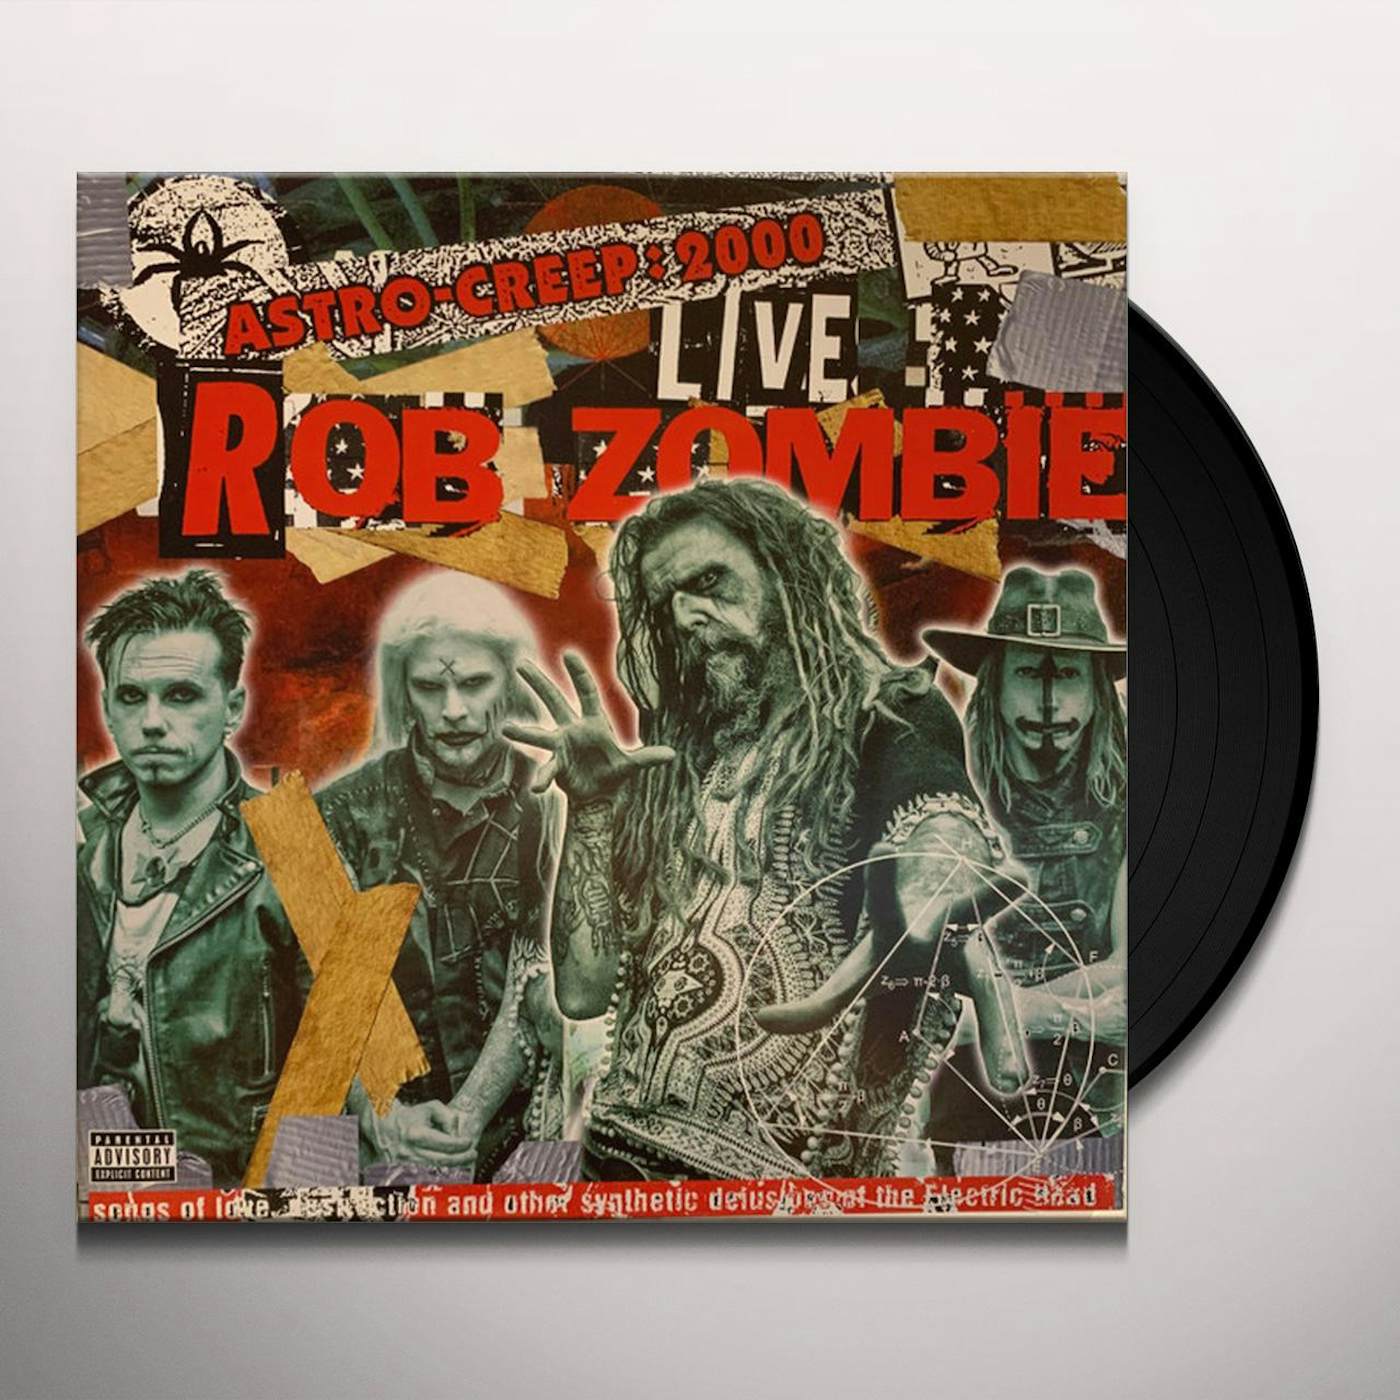 Rob Zombie ASTRO-CREEP: 2000 LIVE SONGS OF LOVE DESTRUCTION & OTHER SYNTHETIC Vinyl Record